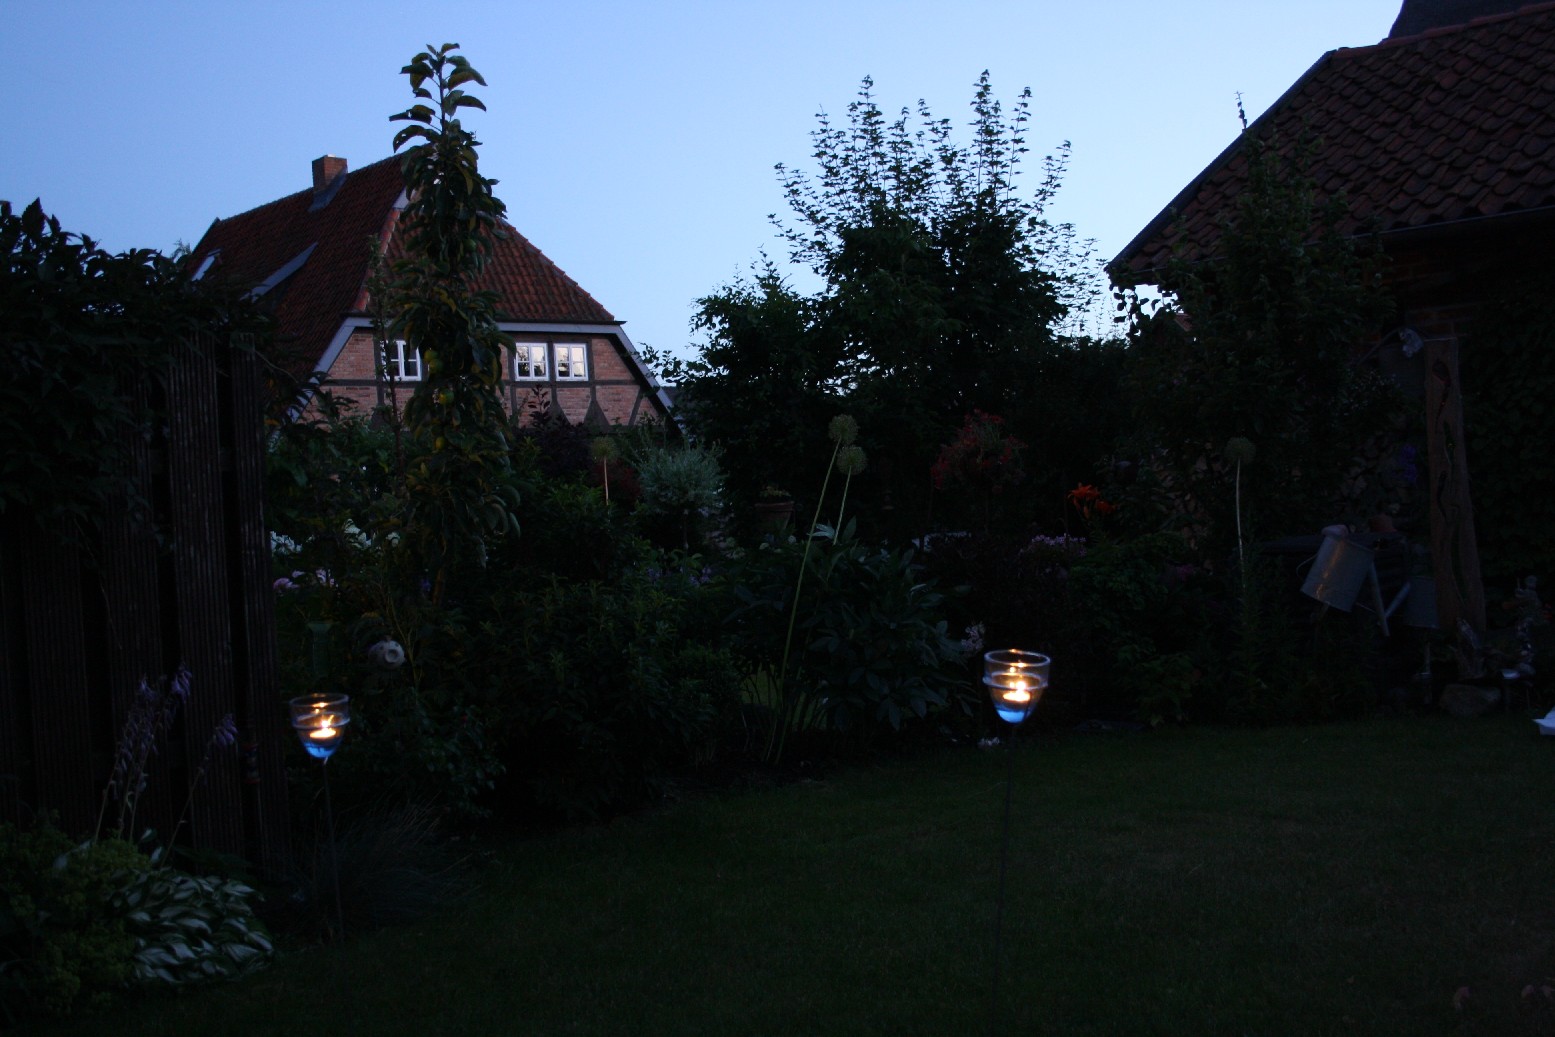 The first evening of our trip to the German Baltic coast we spent quietly in the garden of my parents' summer house.